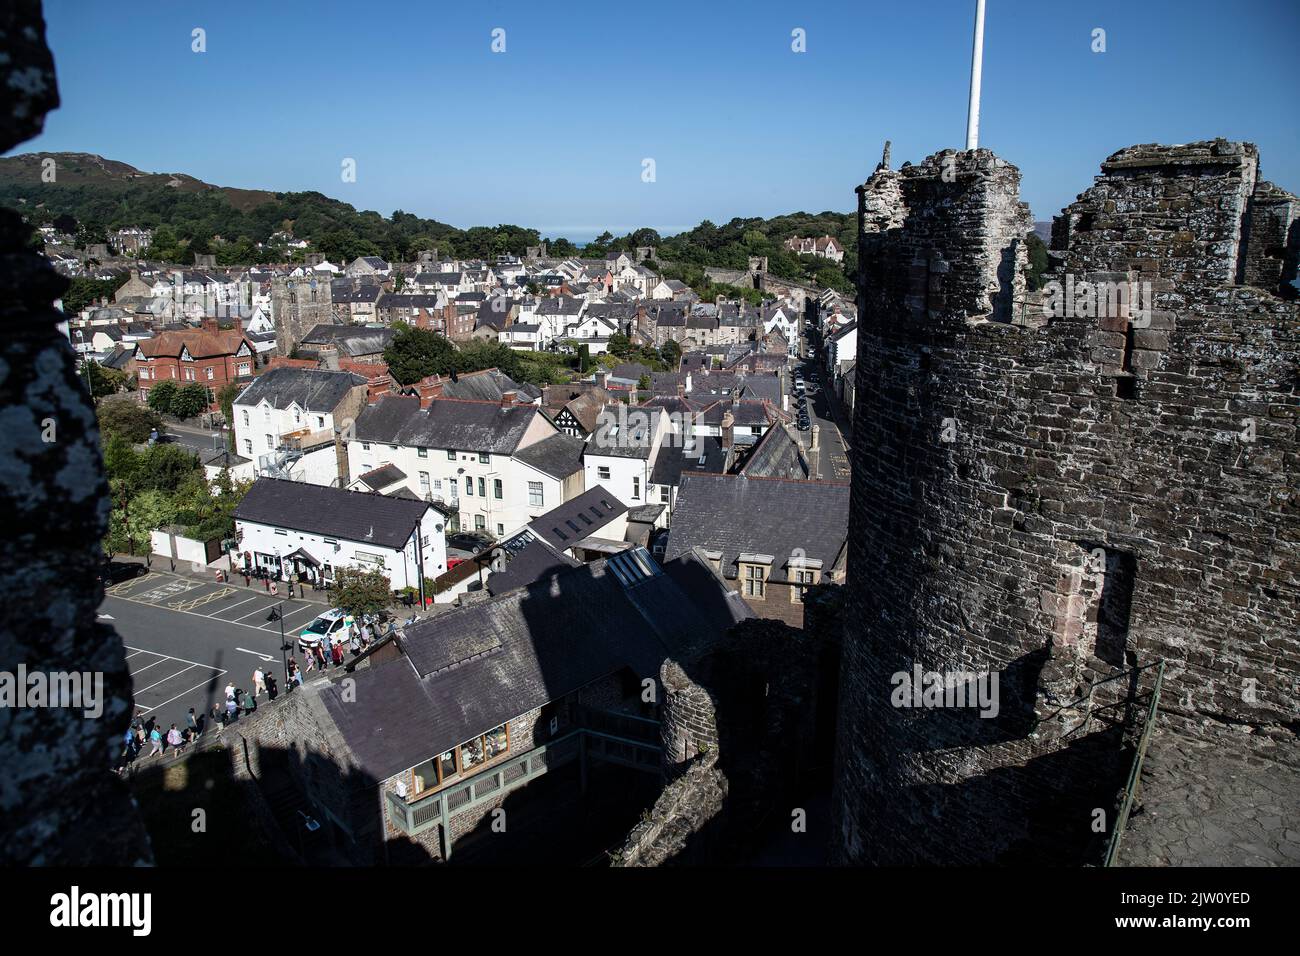 A view of the medieval walled town of Conwy, North Wales viewed from a turret of Conwy Castle looking North on a summer morning Stock Photo